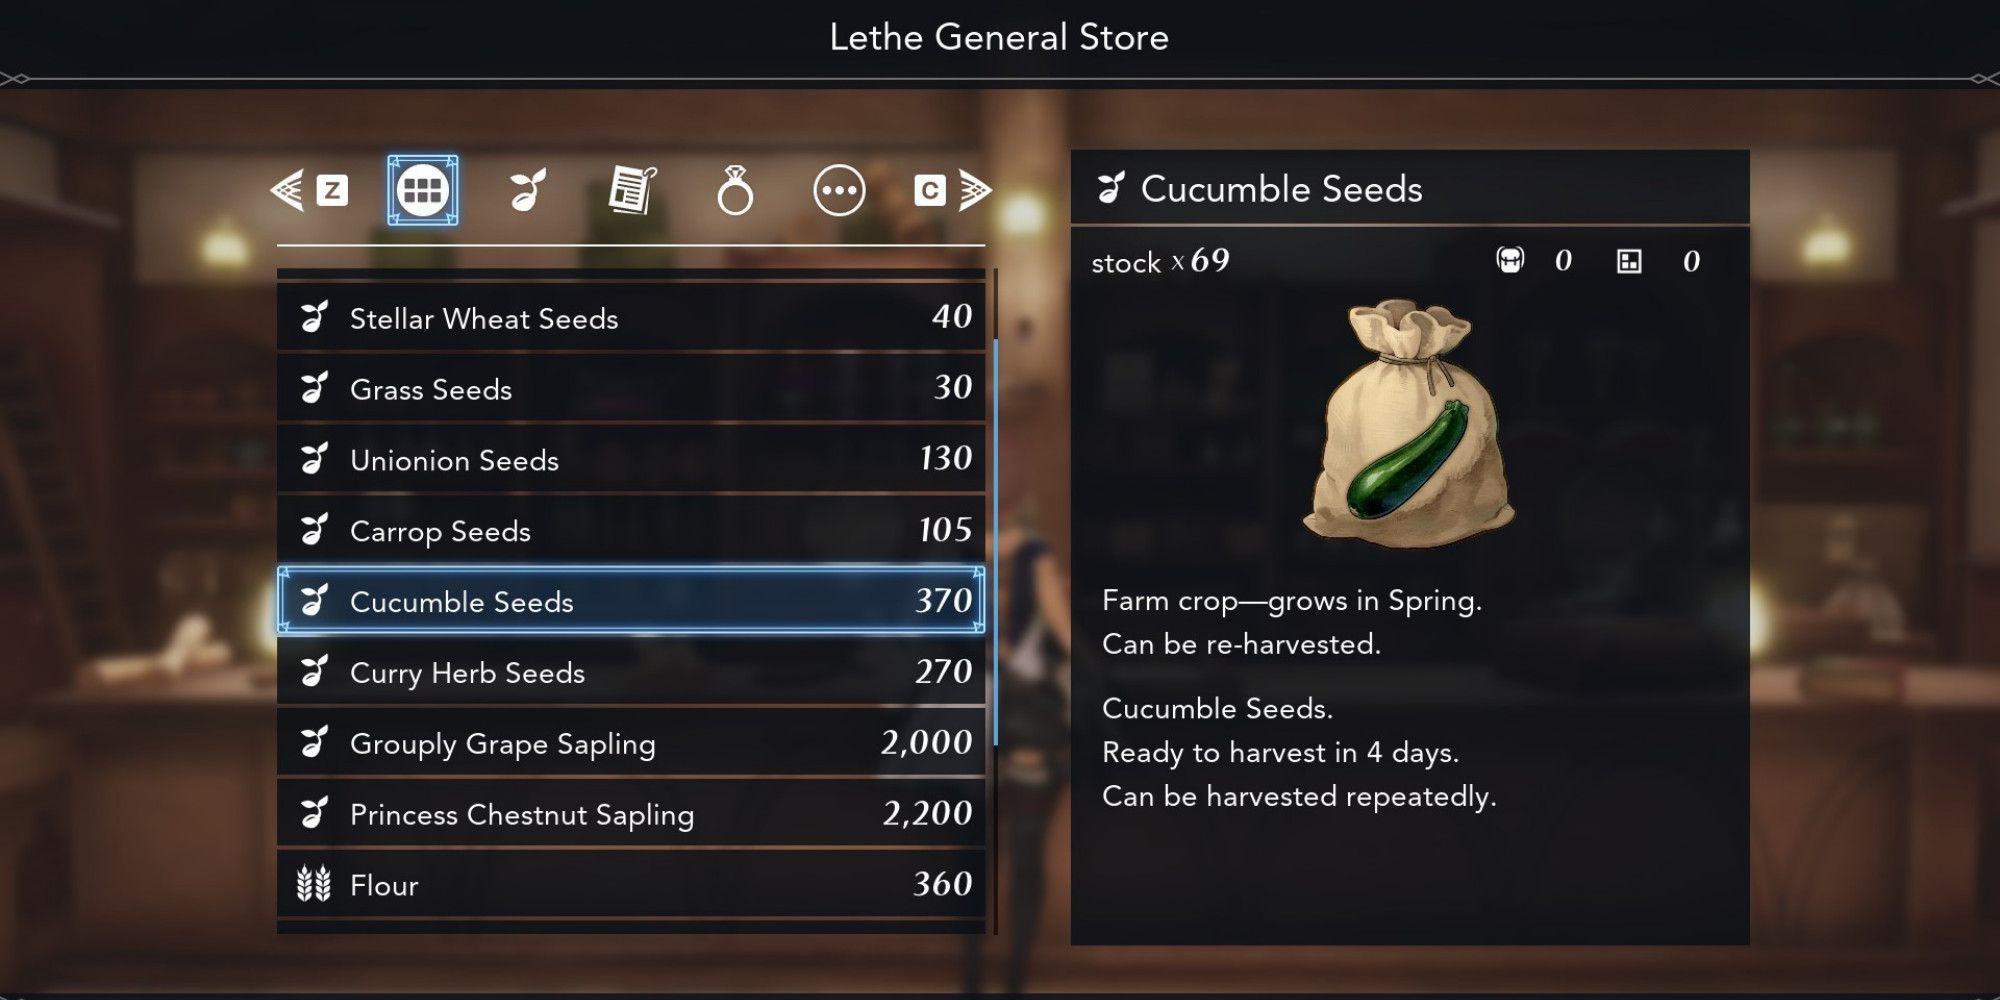 Harvestella - Buying Cucumber Seeds At The Lethe General Store